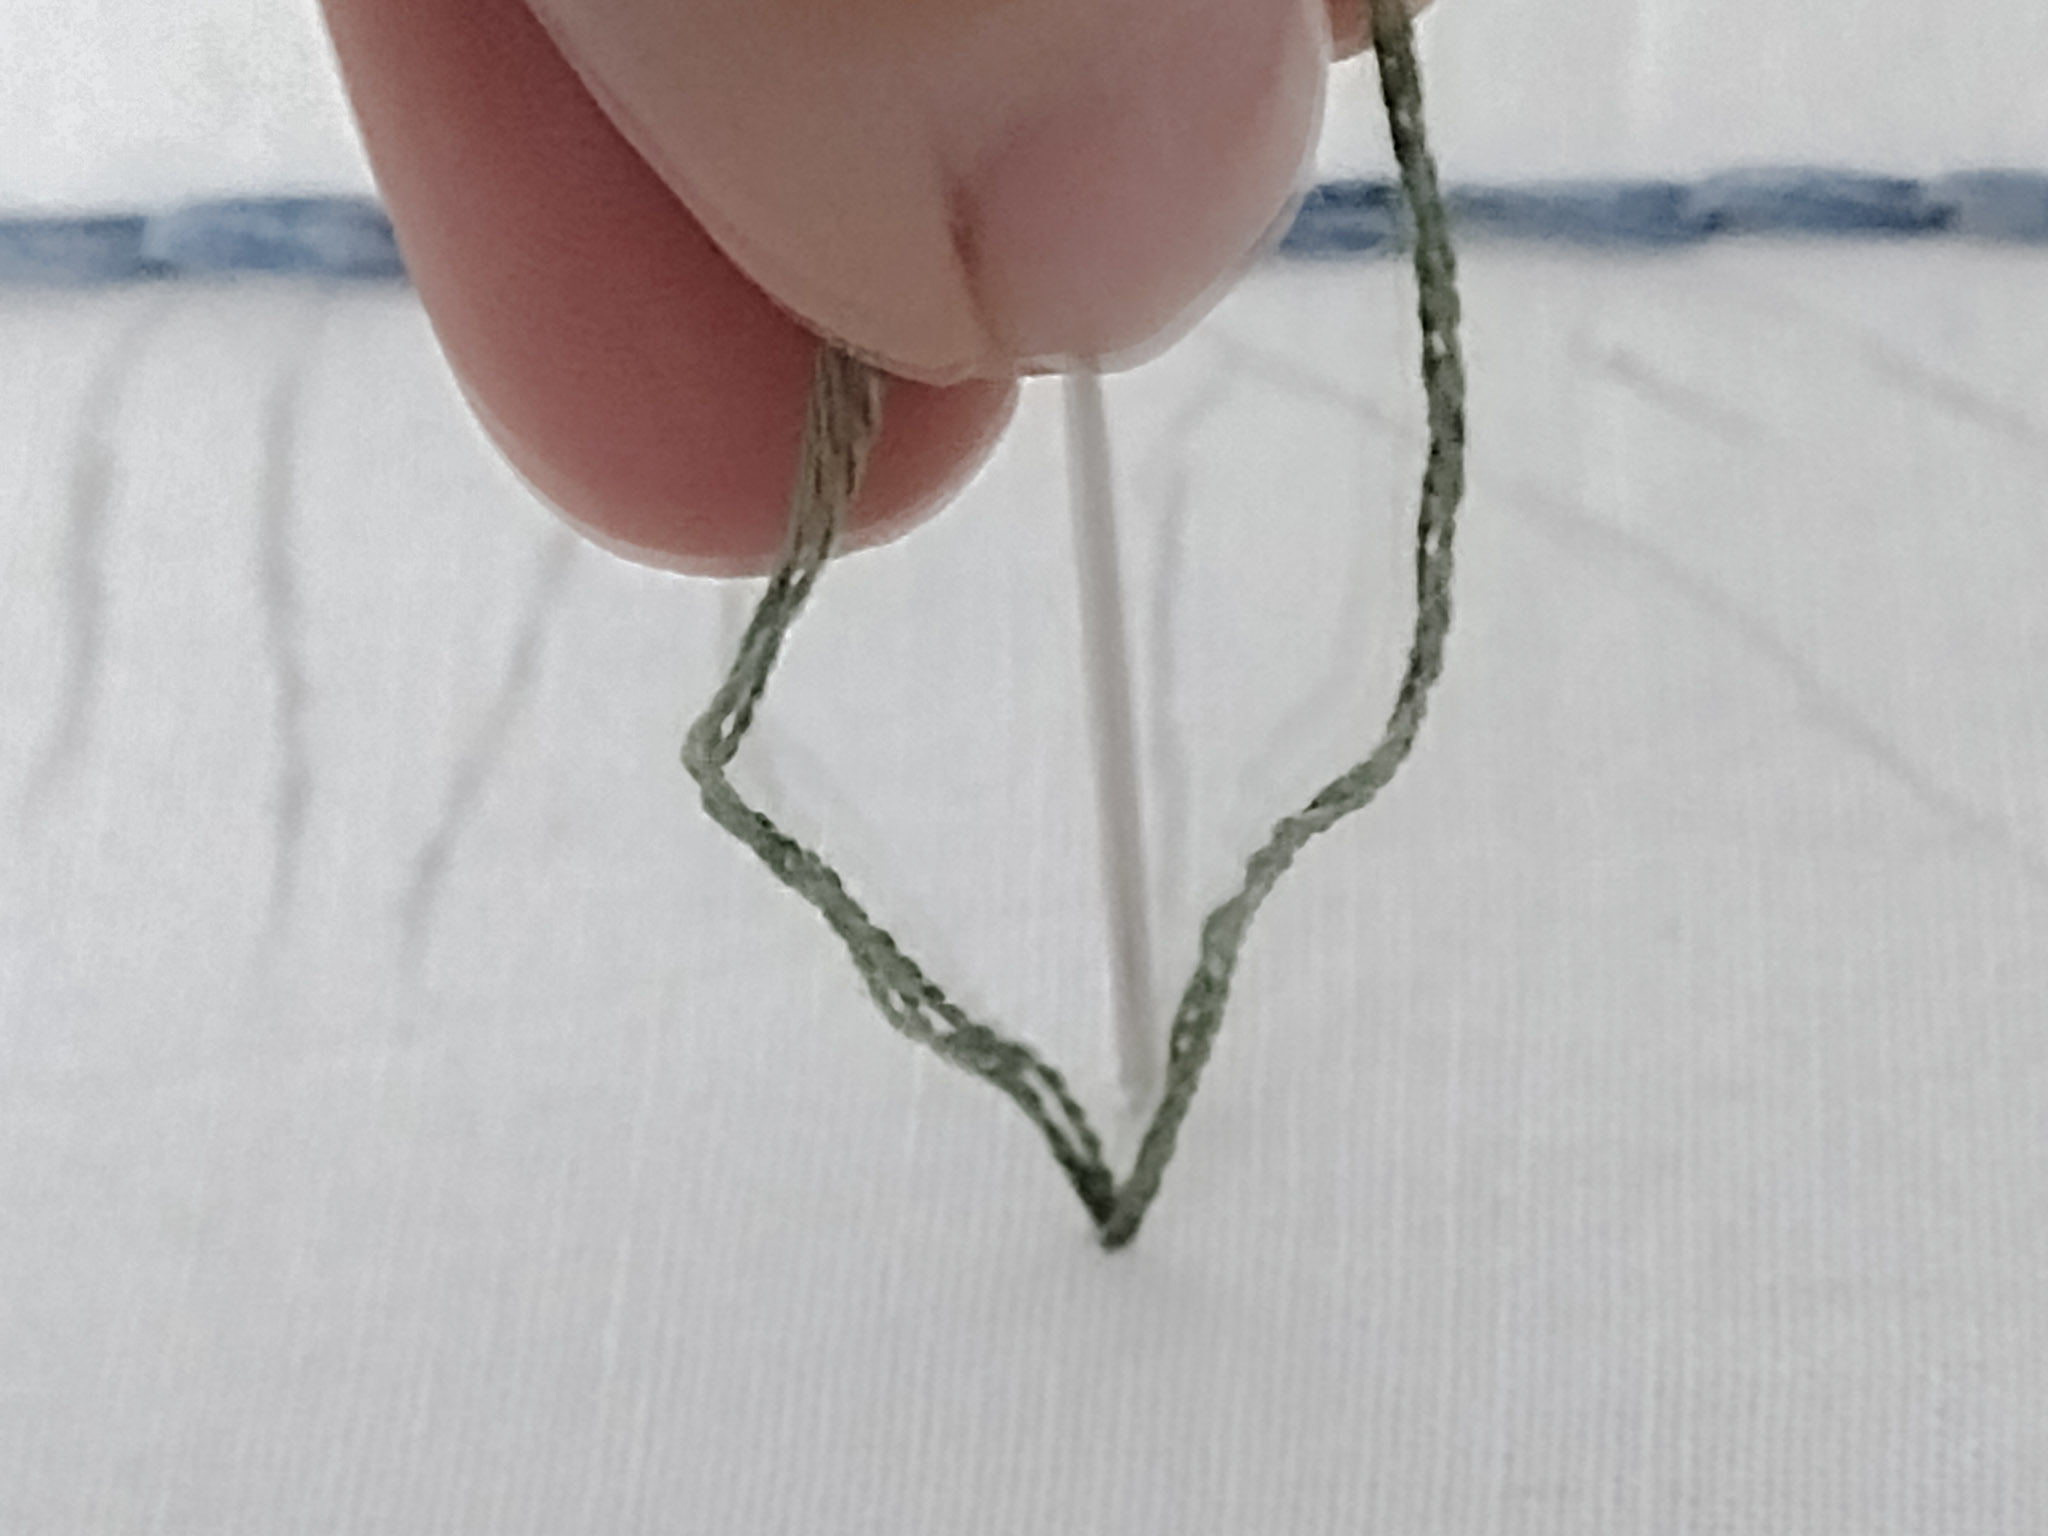 twisting an embroidery loop in front of a needle